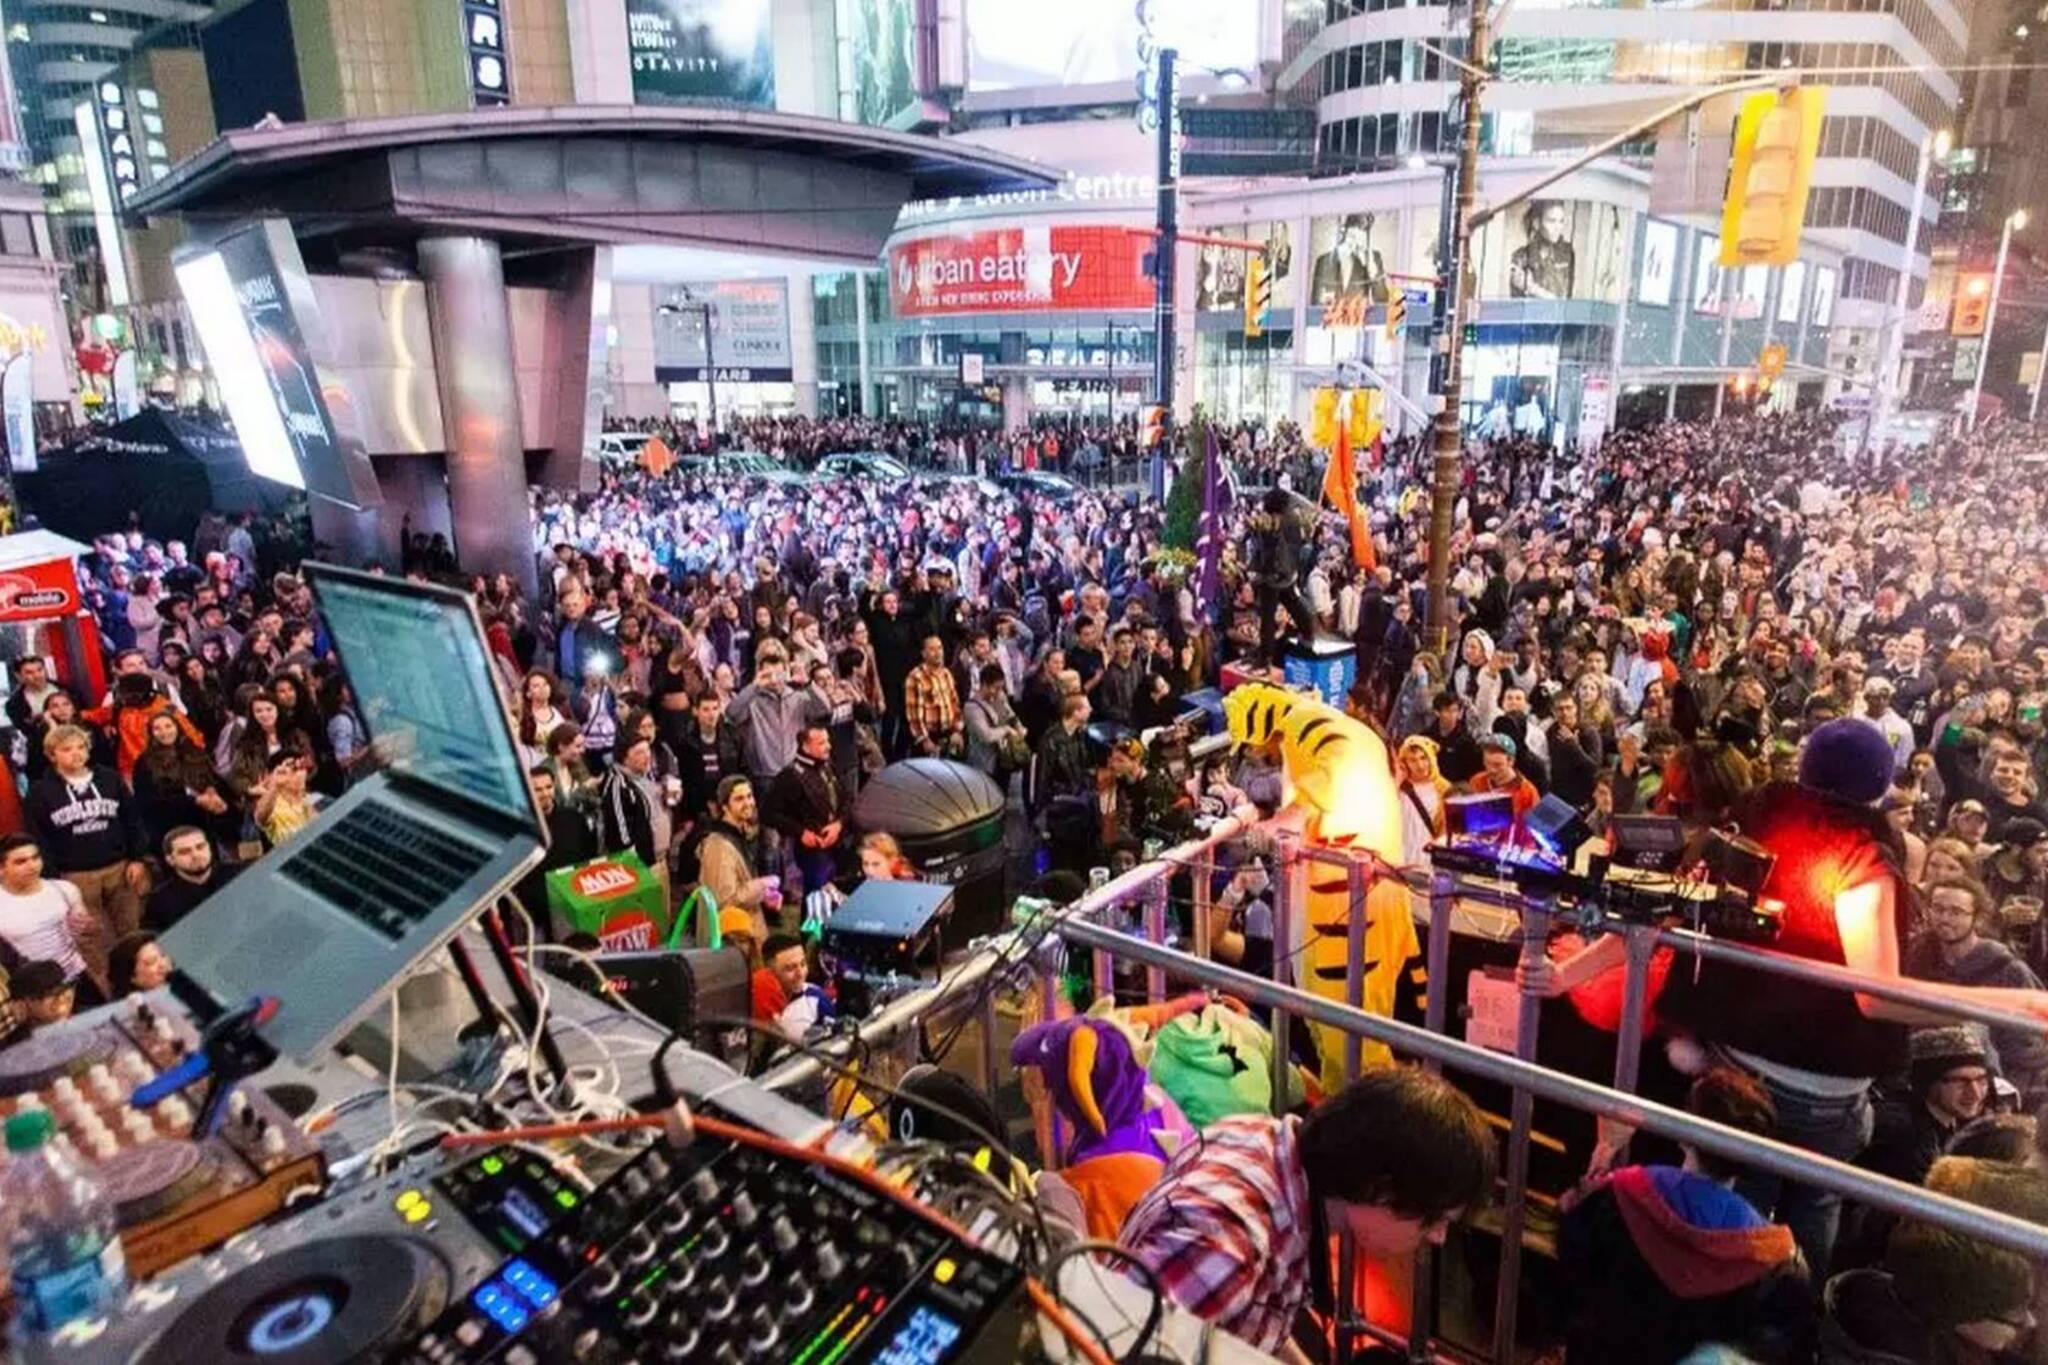 Raves and mermaids are coming to Nuit Blanche in Toronto